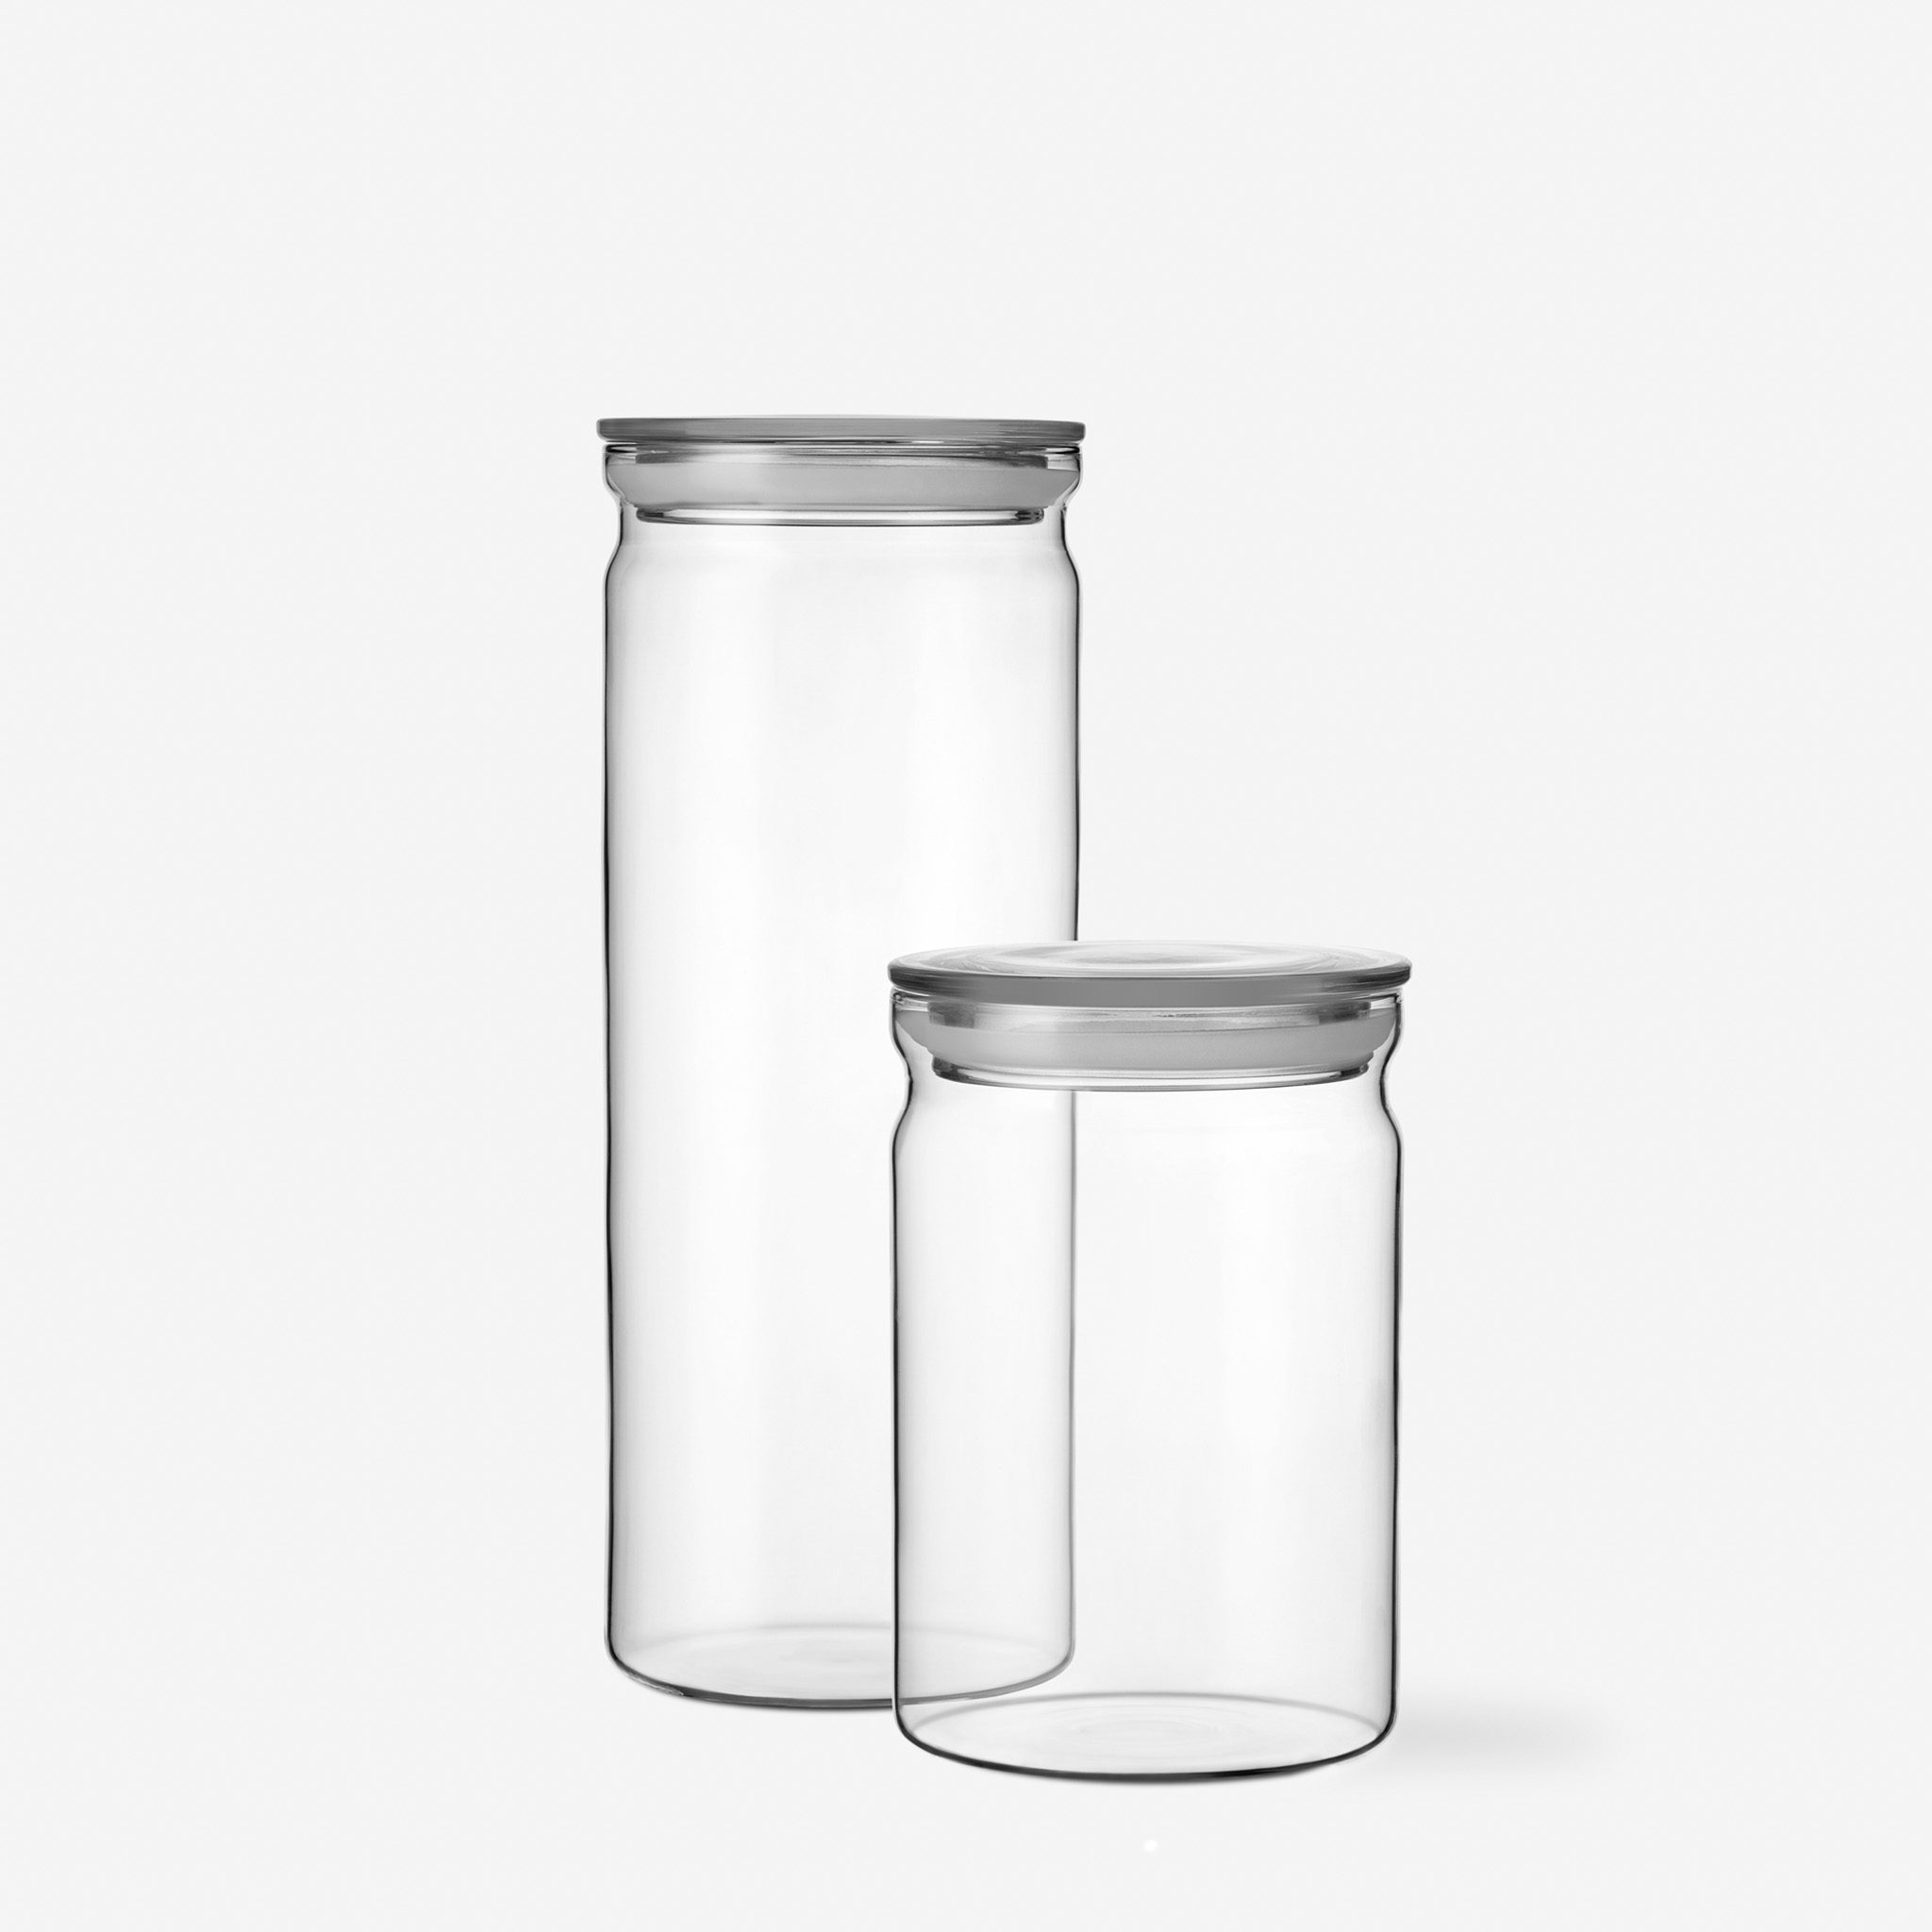 VIPP255 // GLASS CANISTER - 1.7 L